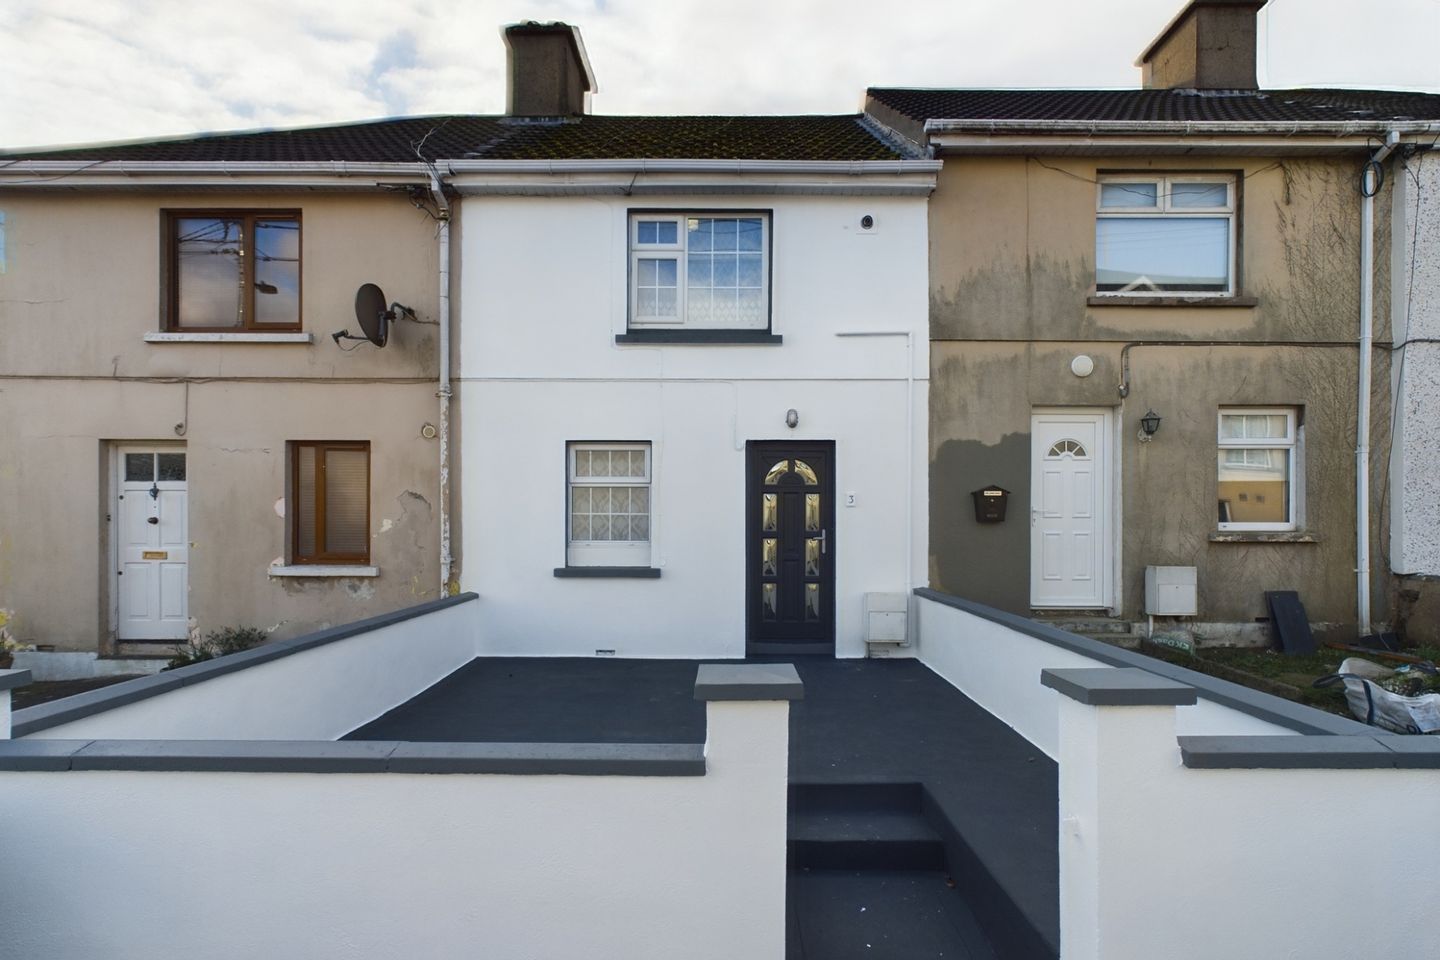 3 Saint Carthages Avenue, Waterford, Waterford City, Co. Waterford, X91X28V